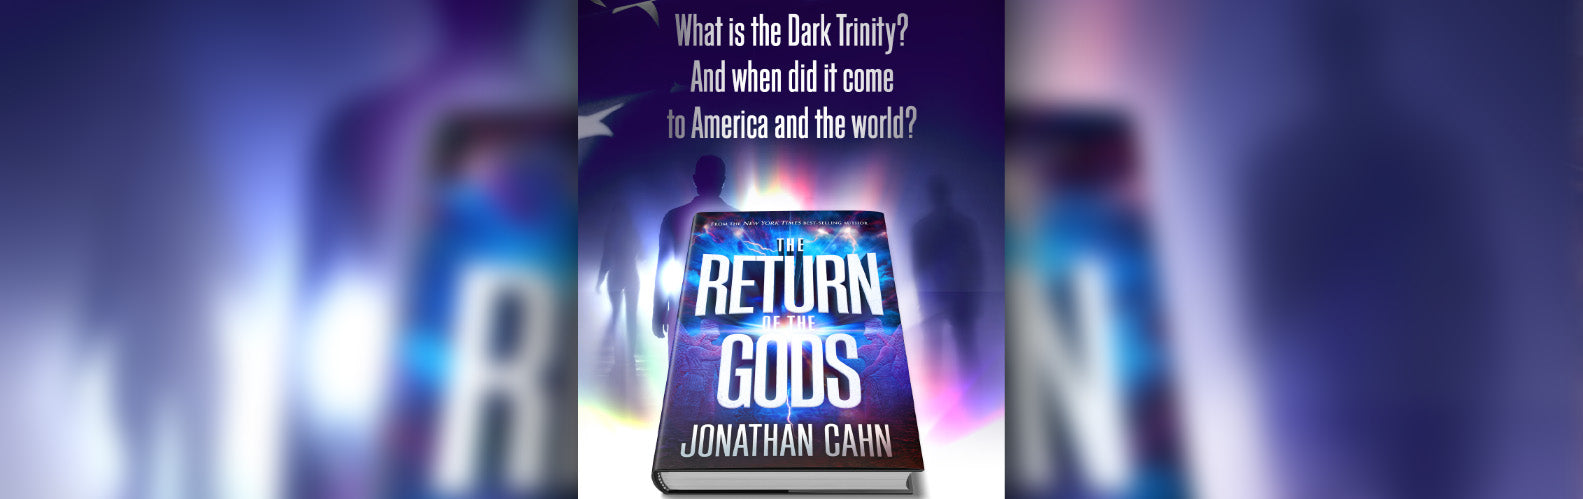 Jonathan Cahn’s new book, ‘The Return of the Gods,’ unveils the ‘dark trinity’ wreaking havoc in today’s world